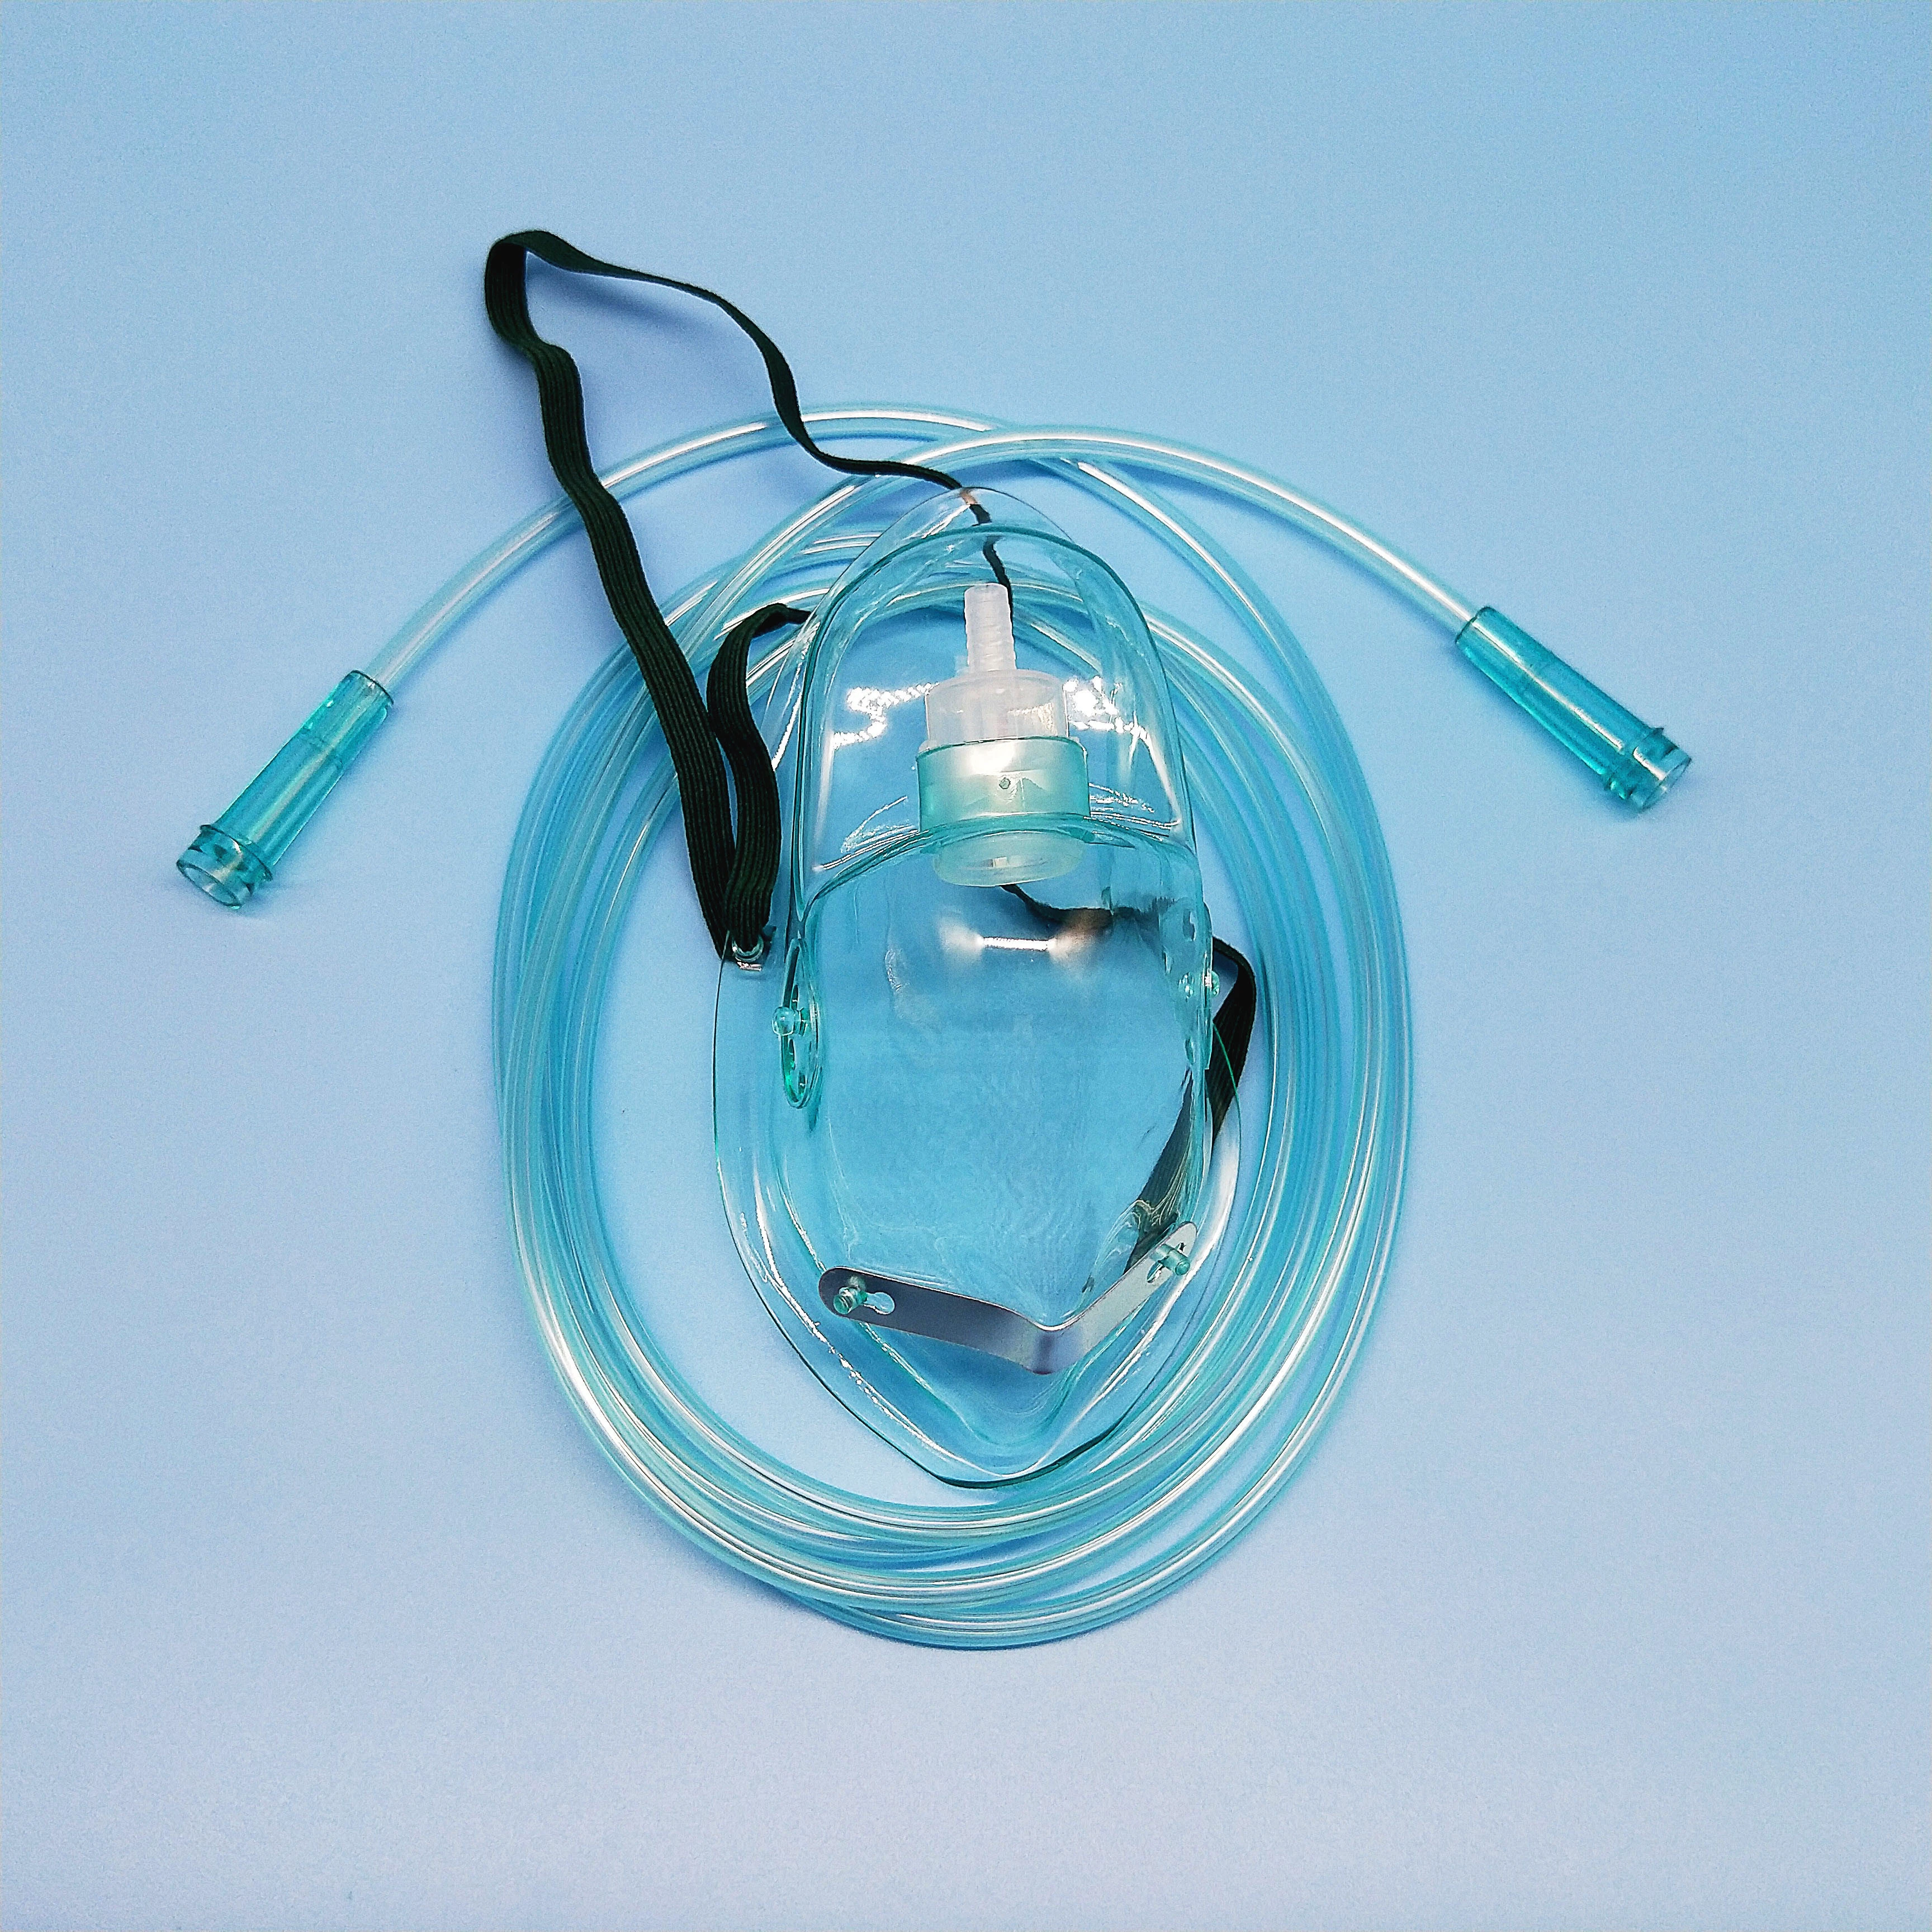 Ningbo manufacturer consumables medical devices oxygen mask prices adult oxygen mask kit with green mask